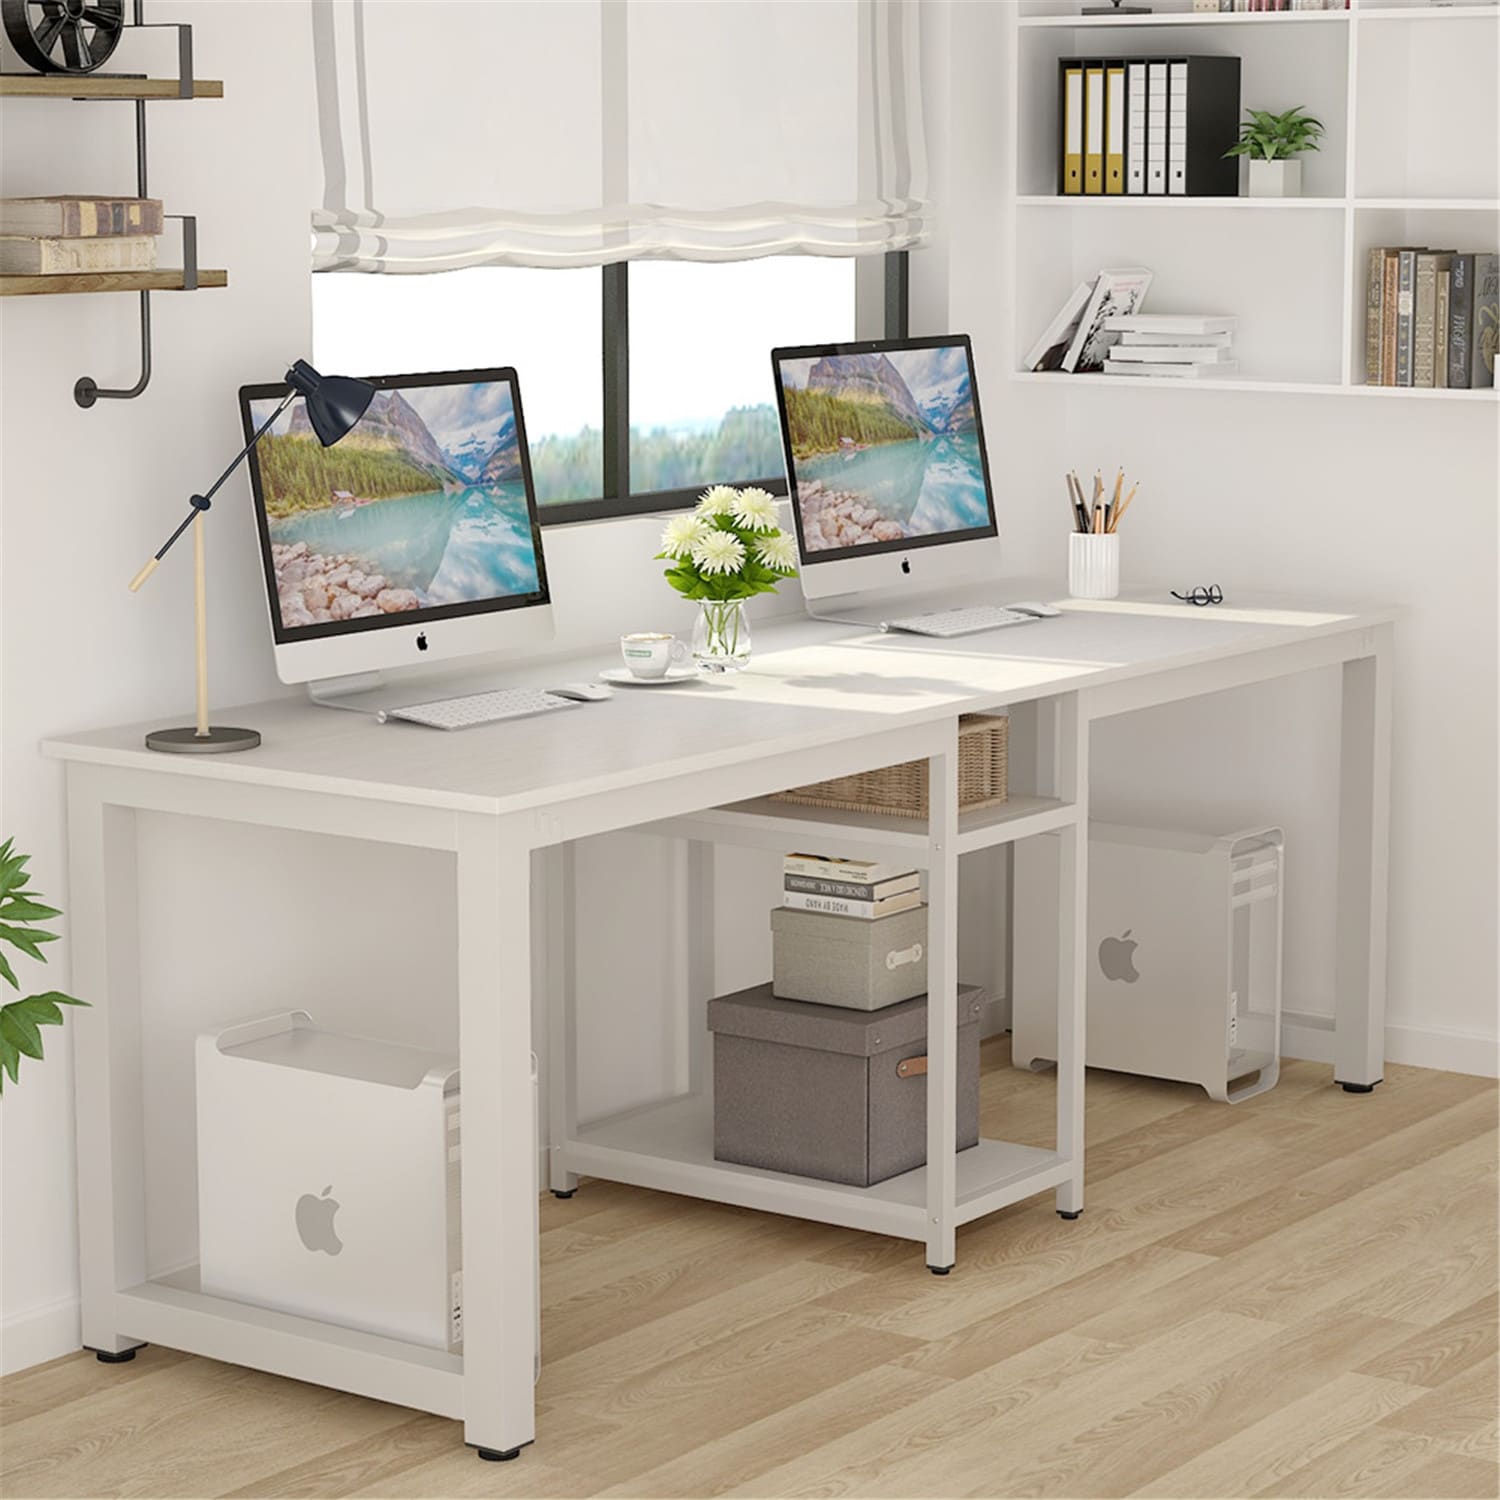 78.7 Inches Extra Long Computer Desk 2 Person Desk